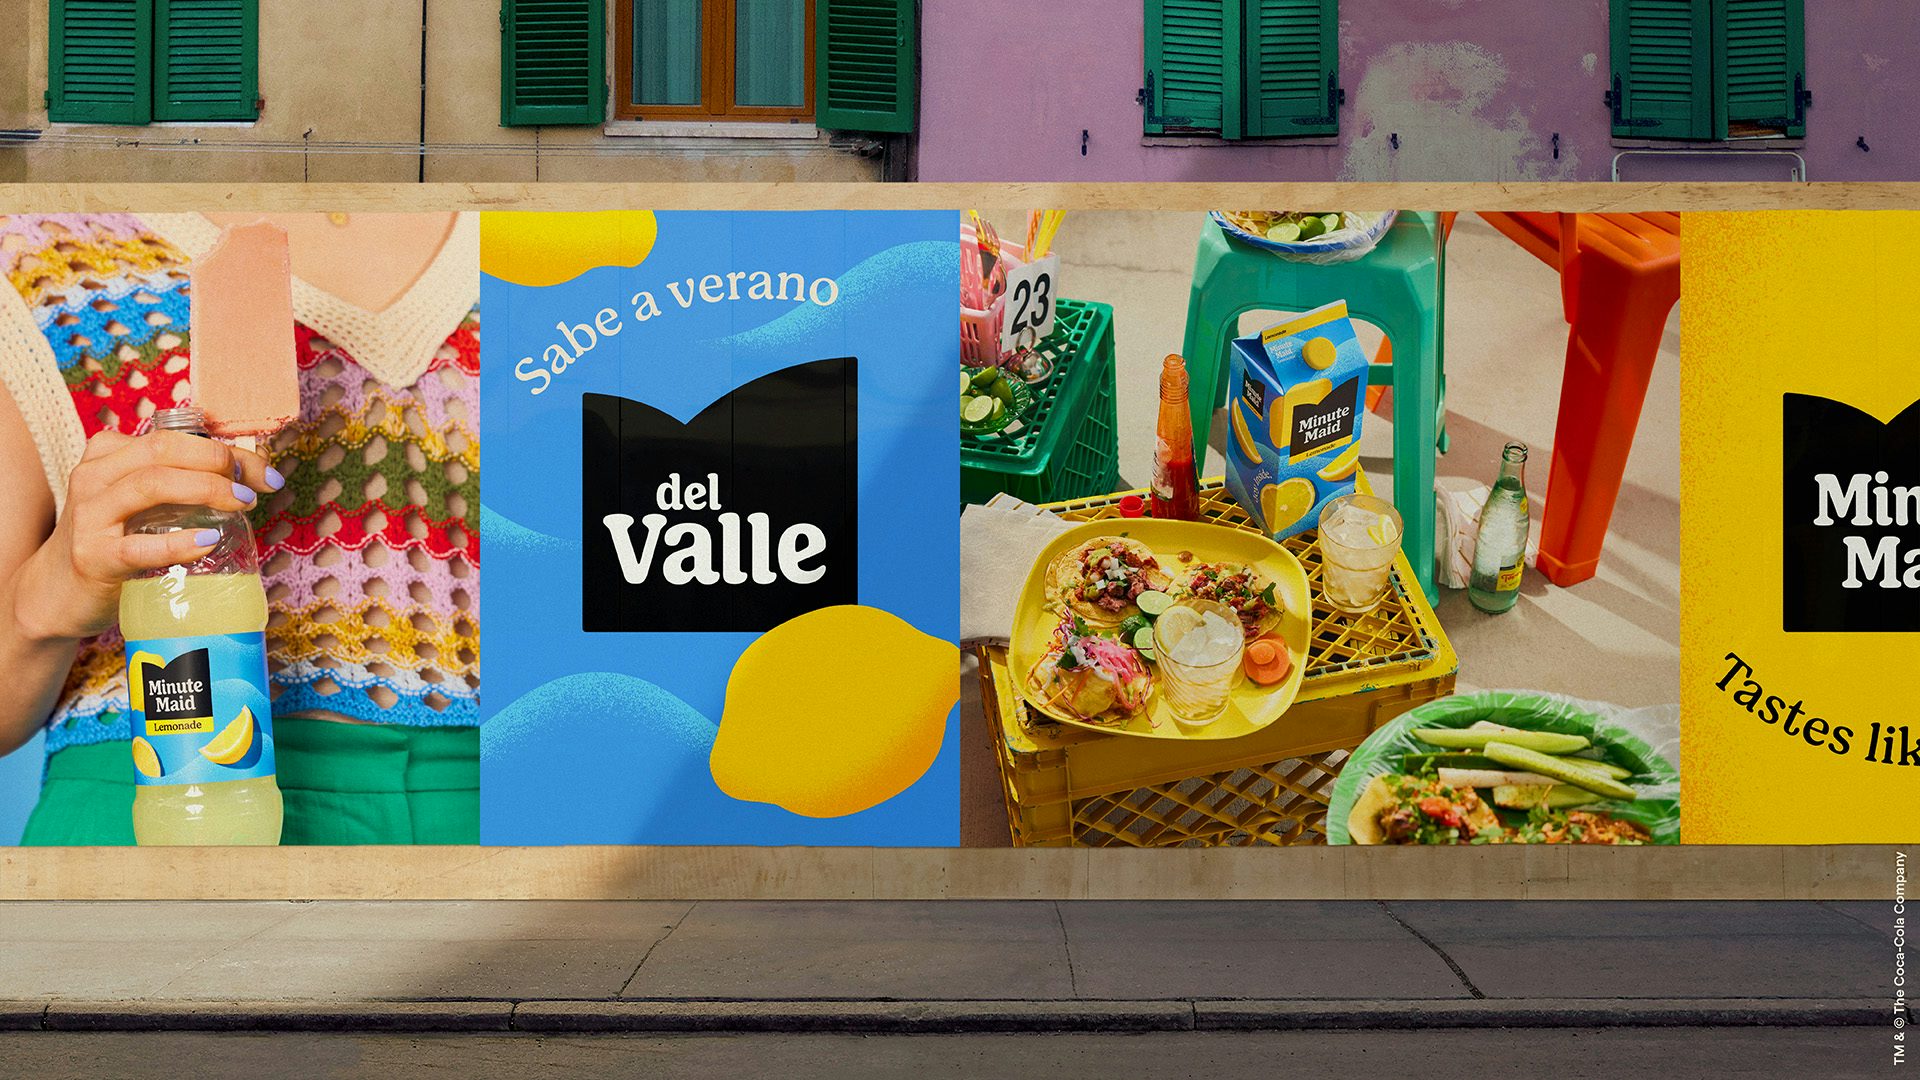 Image of Minute Maid's new branding shown on an outdoor poster campaign, featuring lifestyle images of Minute Maid products and a poster of the Minute Maid logo with the 'del Valle' brand name